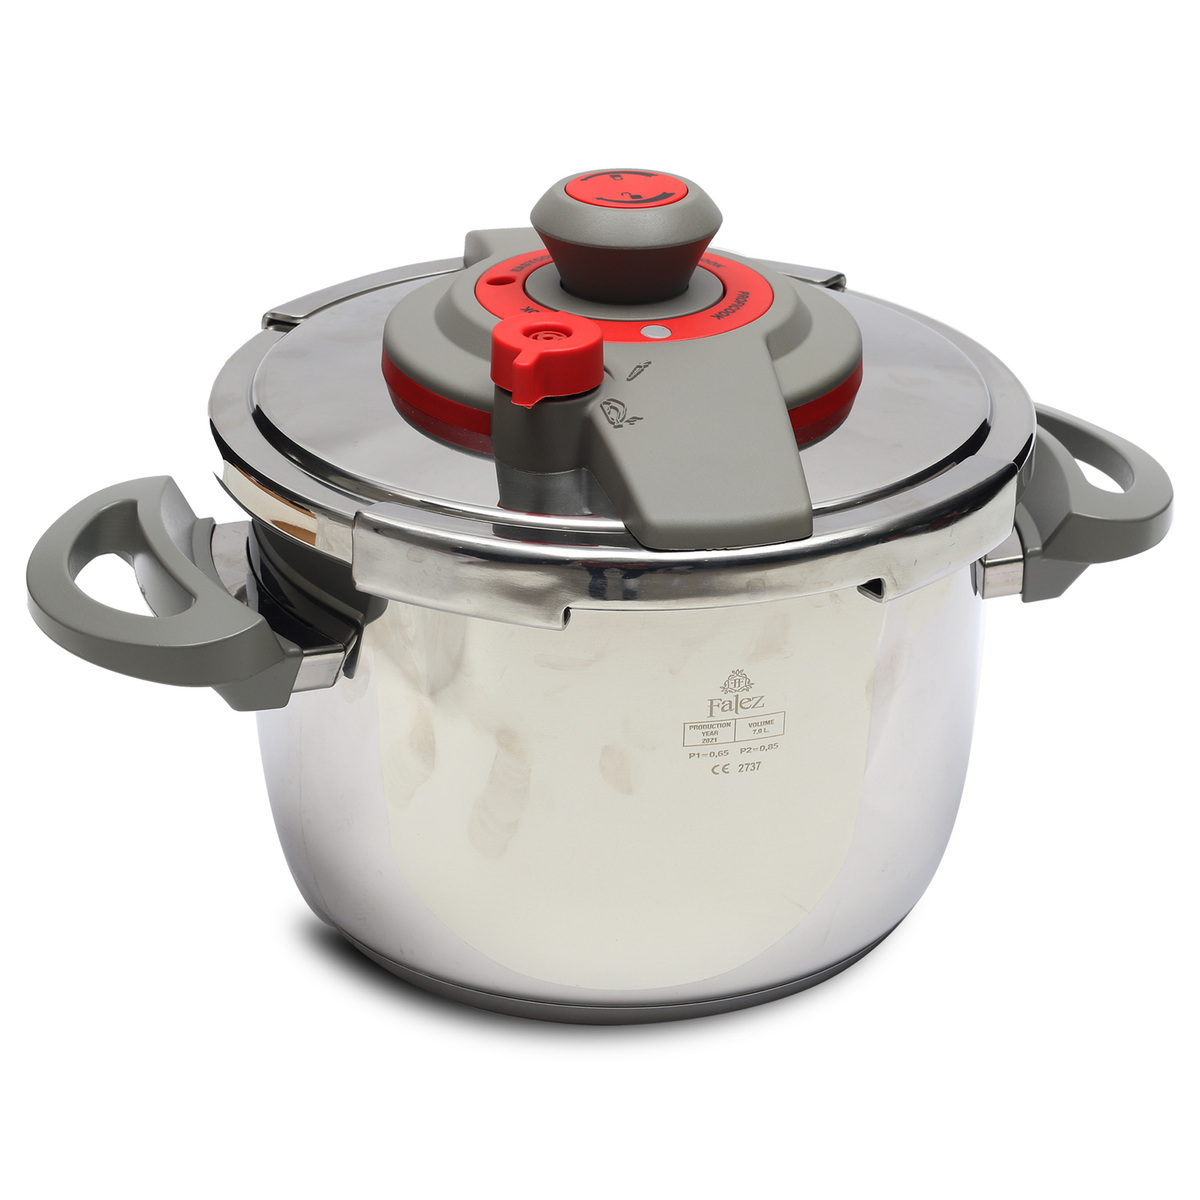 Falez Stainless Steel Pressure Cooker F14739 7Litre